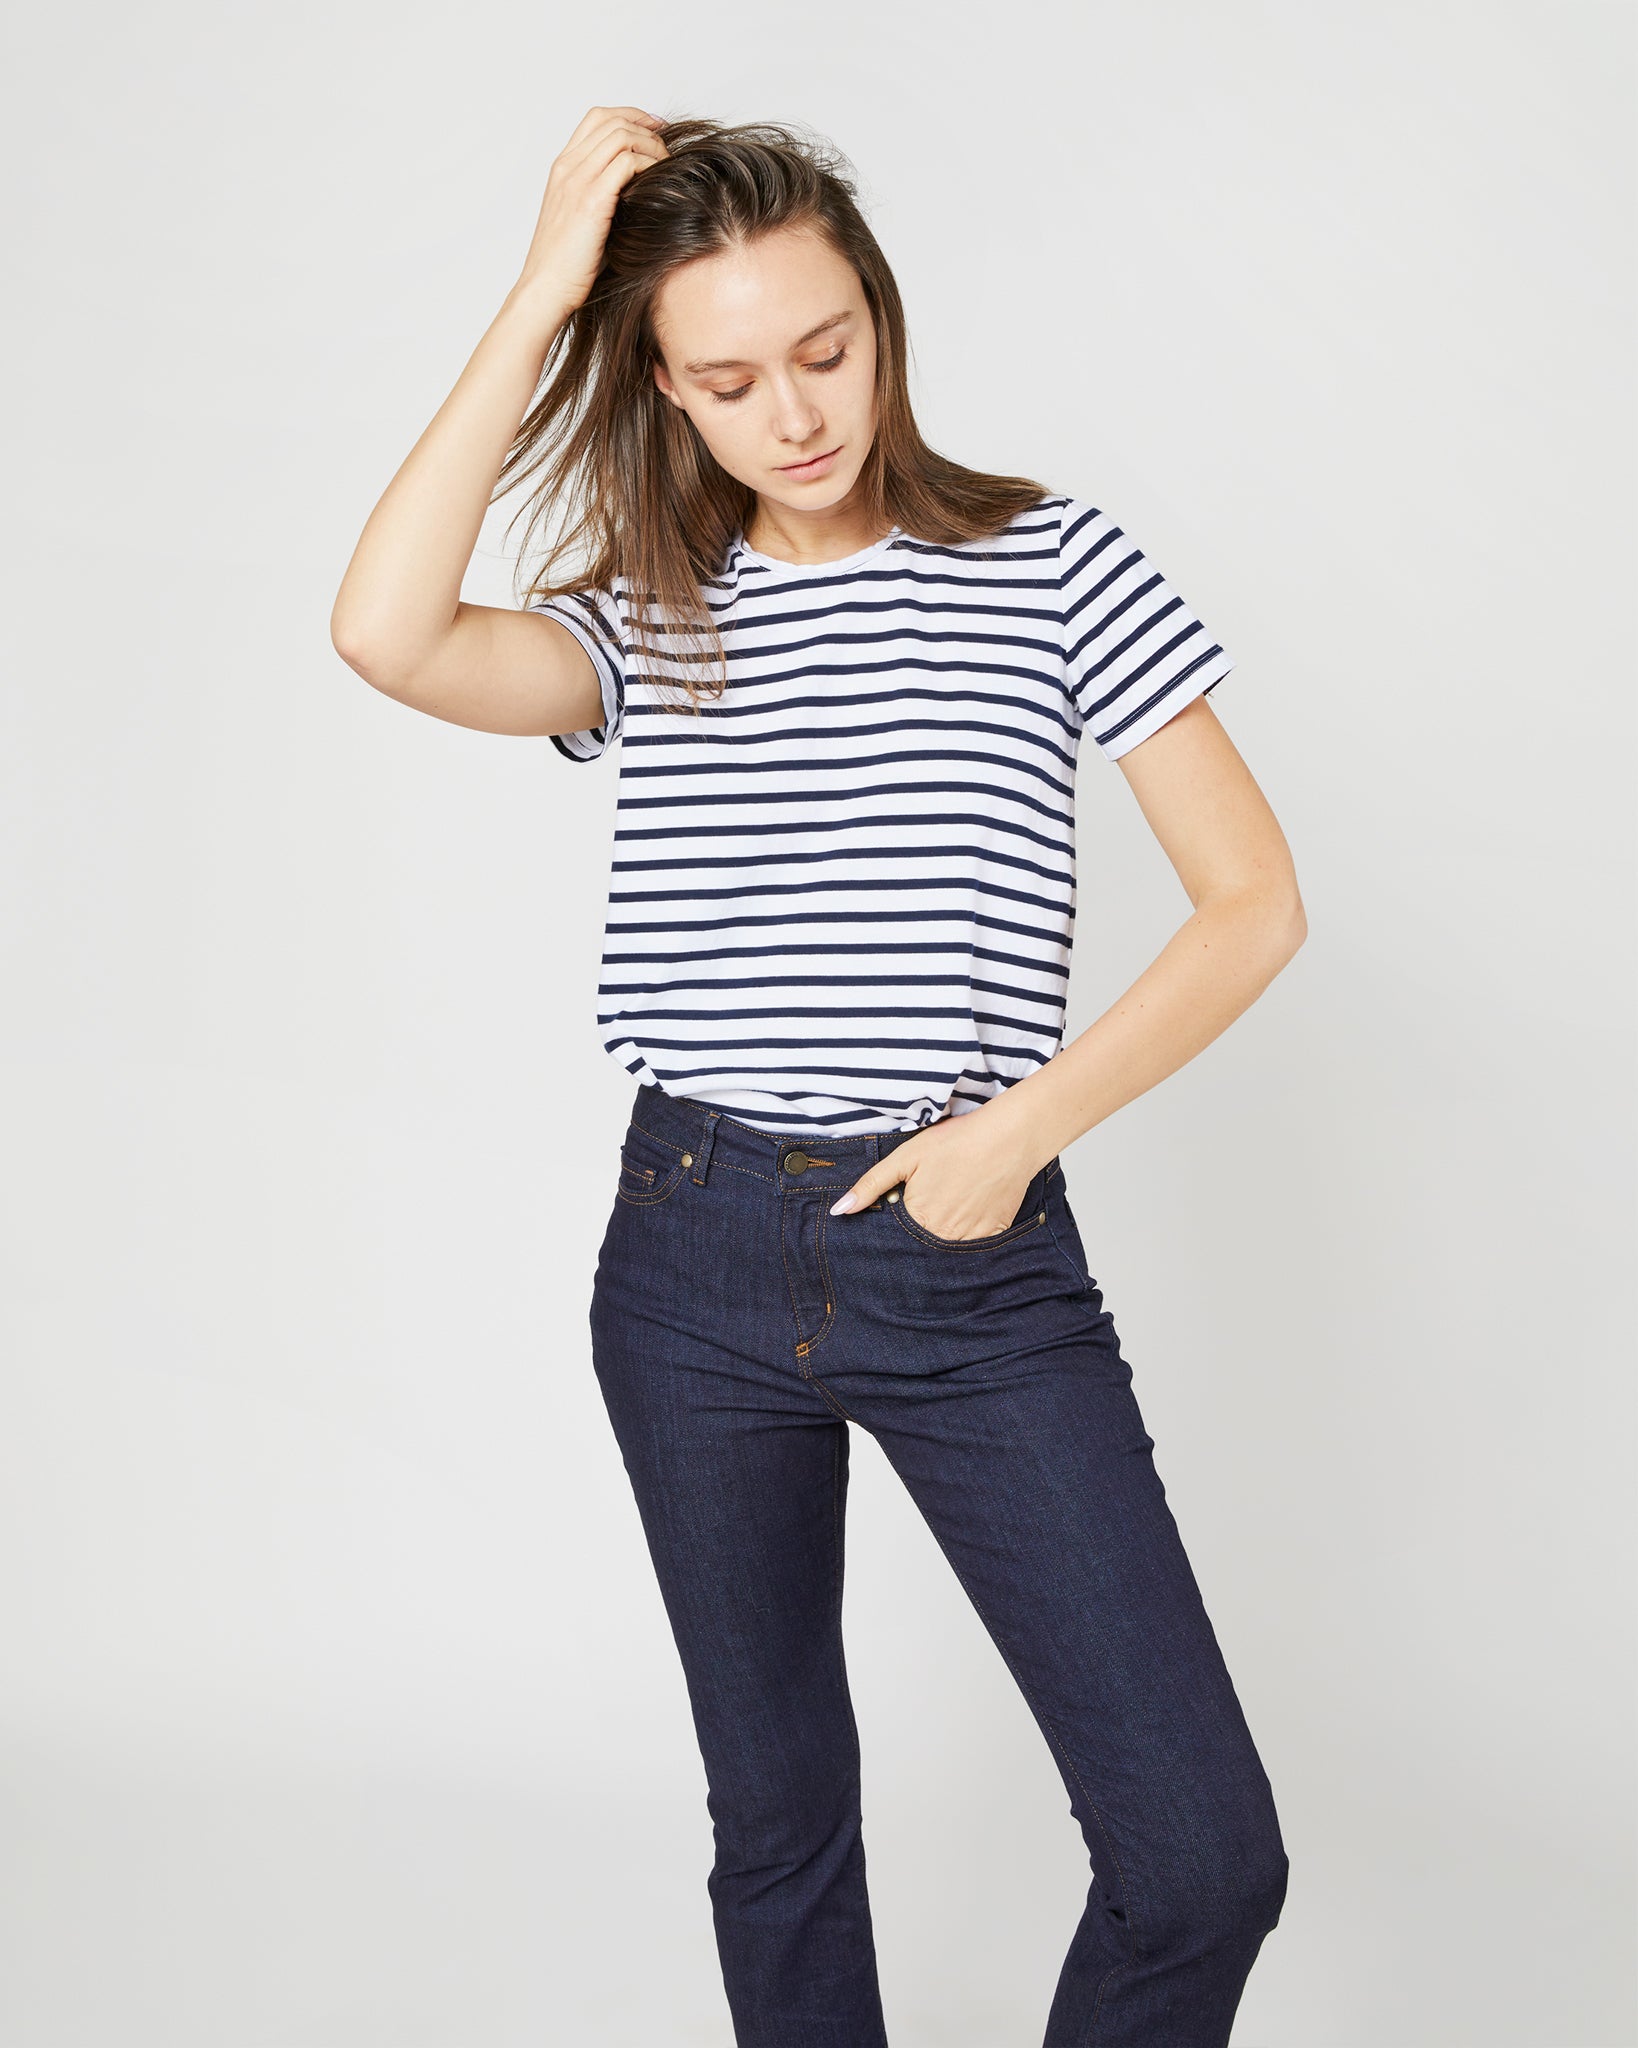 Short-Sleeved Relaxed Tee in White/Navy Stripe Jersey